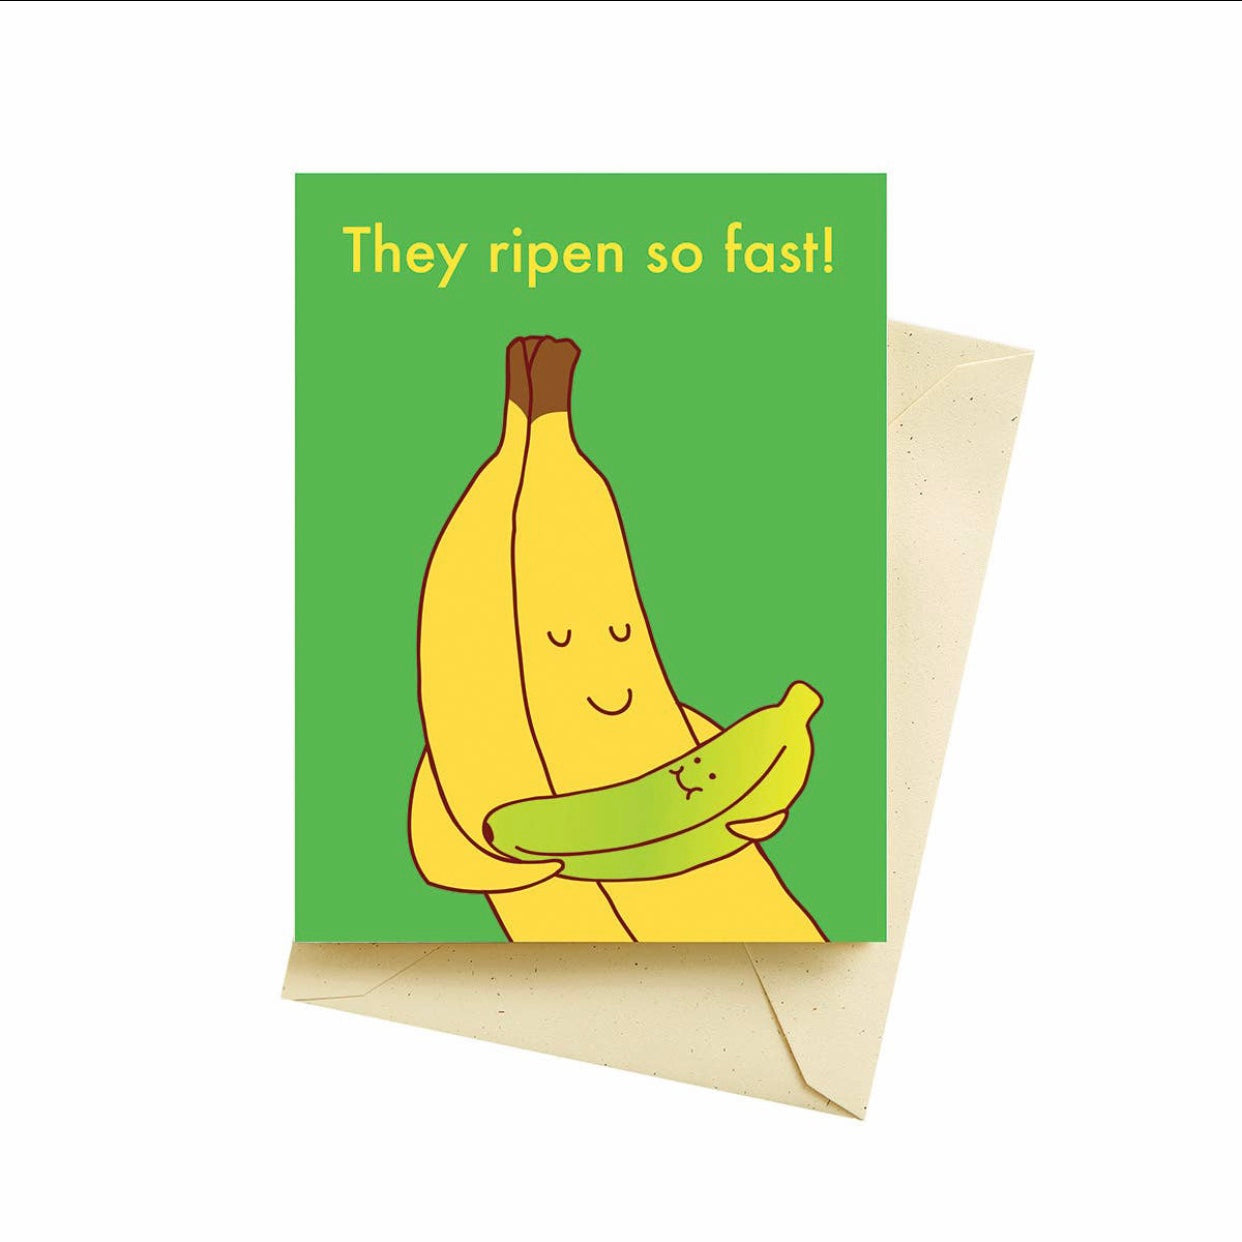 They ripen so fast greeting card